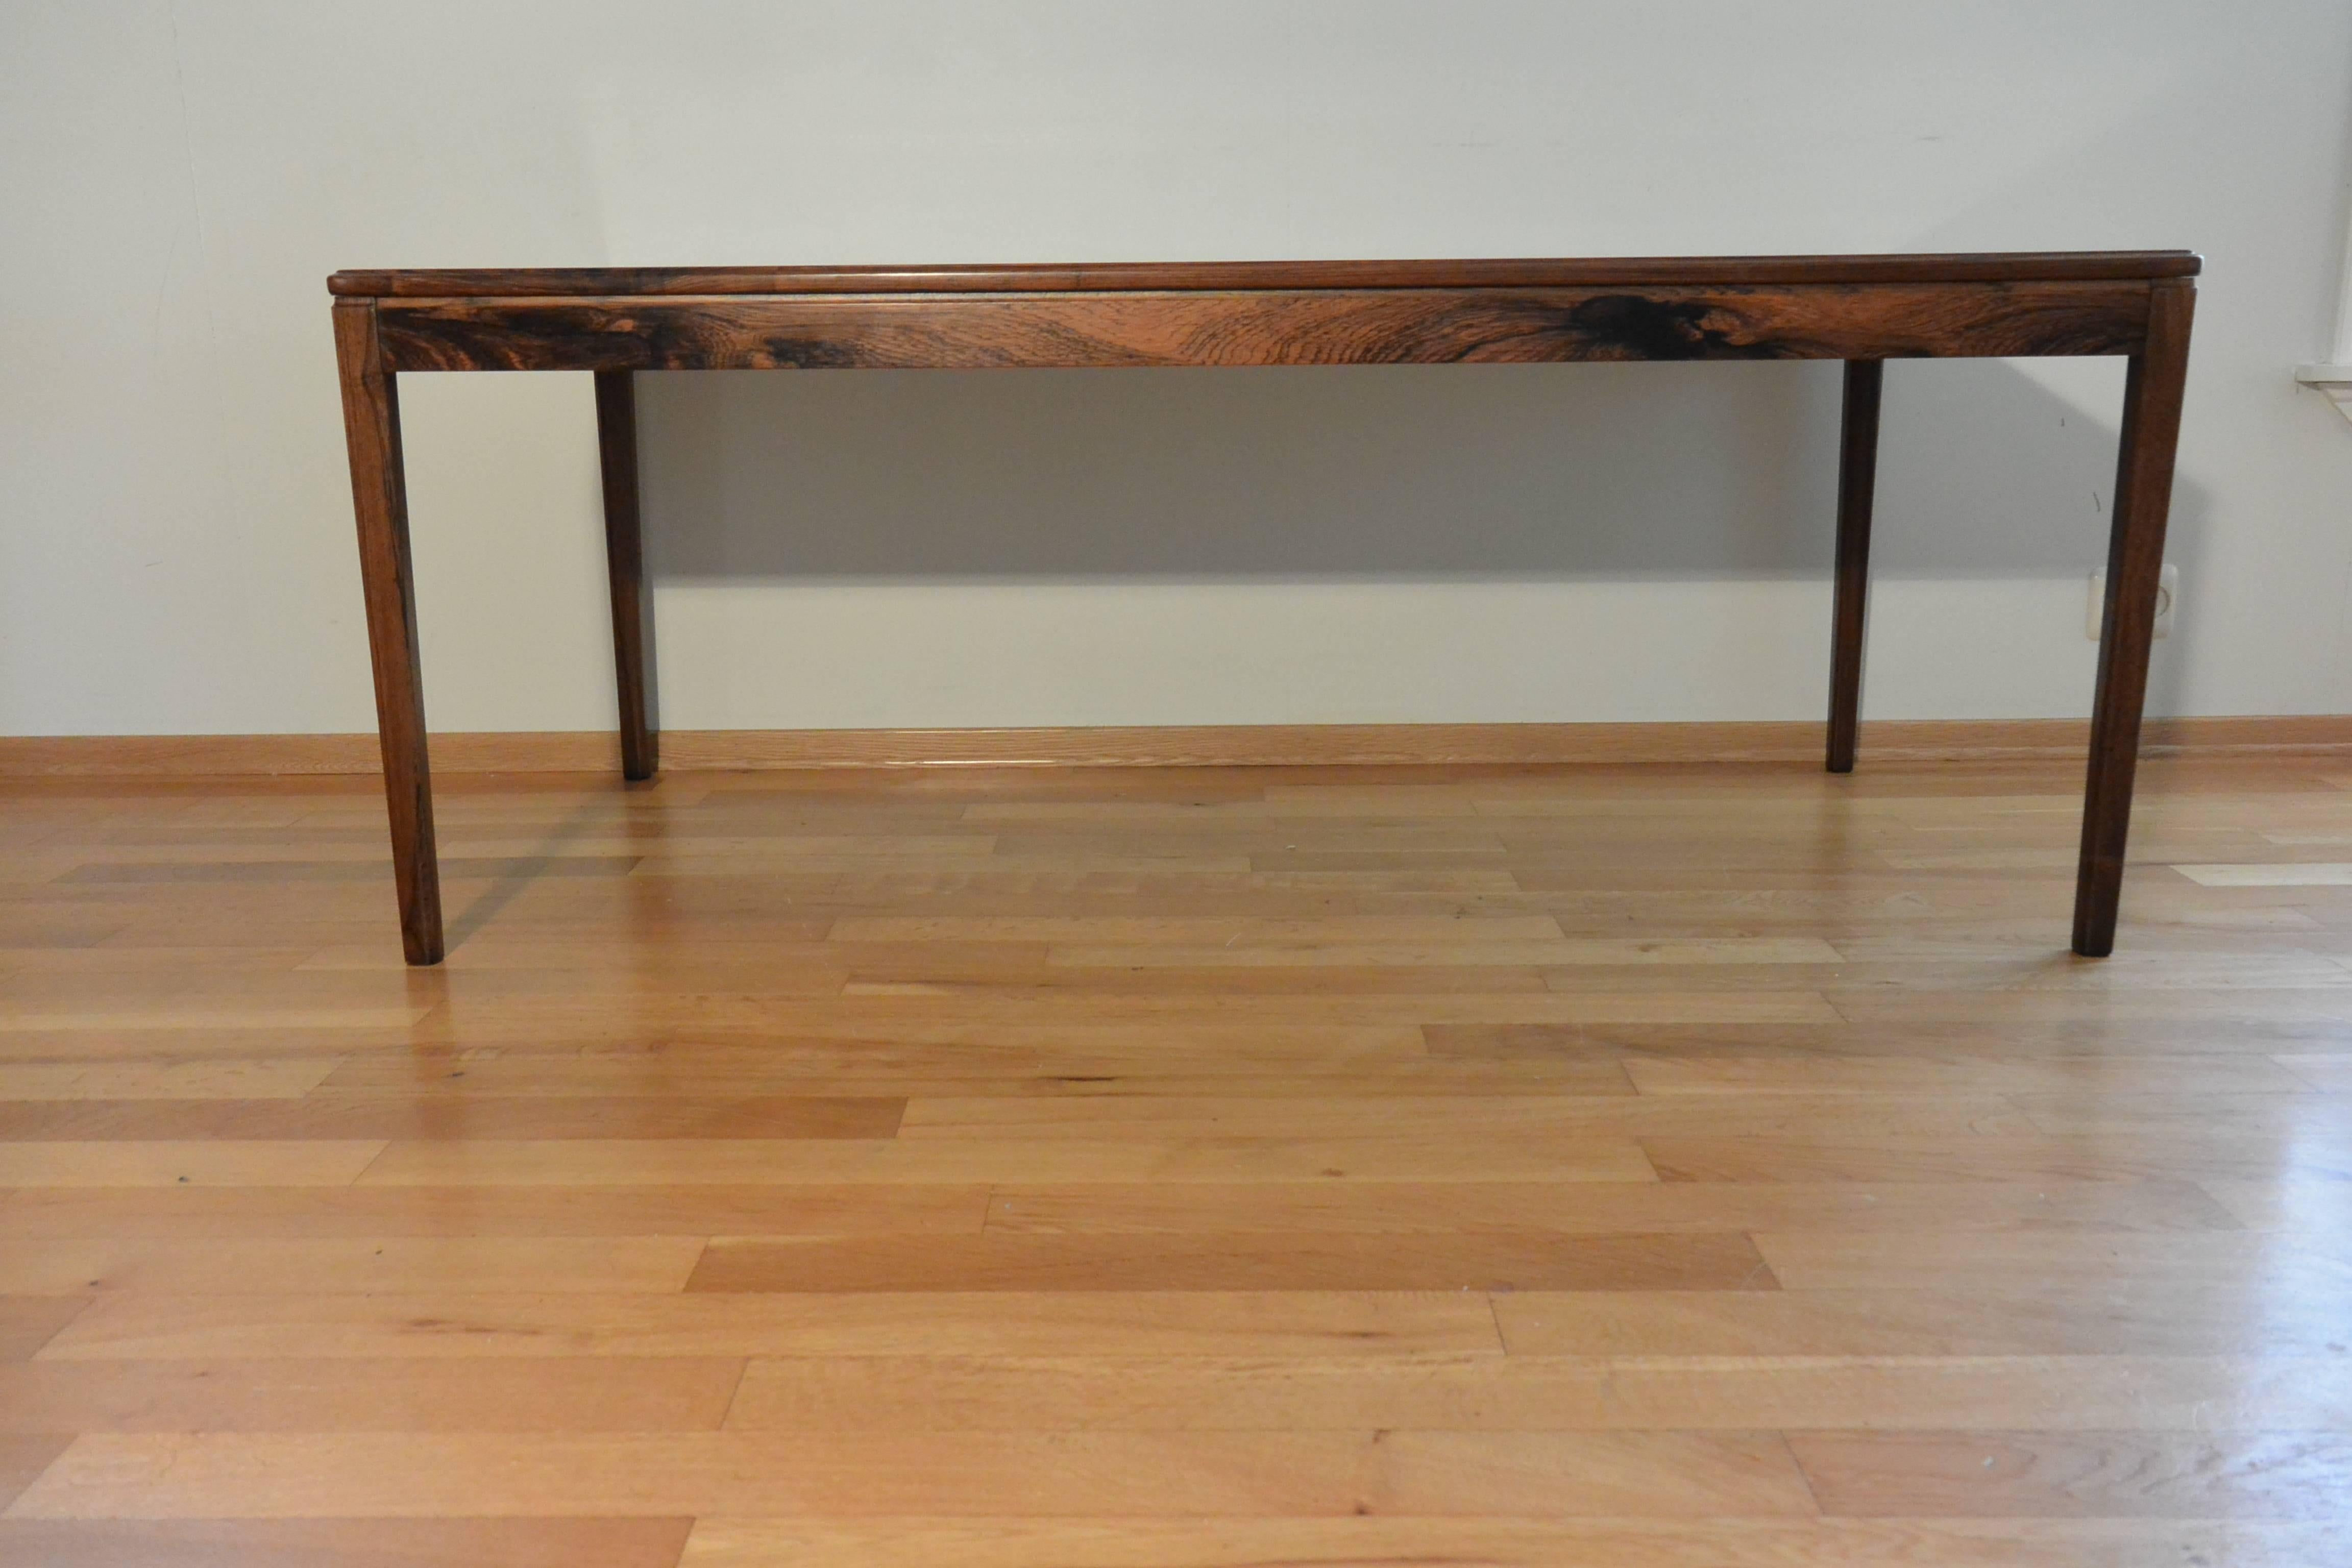 Manufactured in Norway in the 1960s this beautiful rosewood table can be placed in a lounge, office, hallway as a side table, sofa table or coffee table. The table is unmarked/unlabelled is Afdal from Haug Snekkeri, has similar washing/ care label